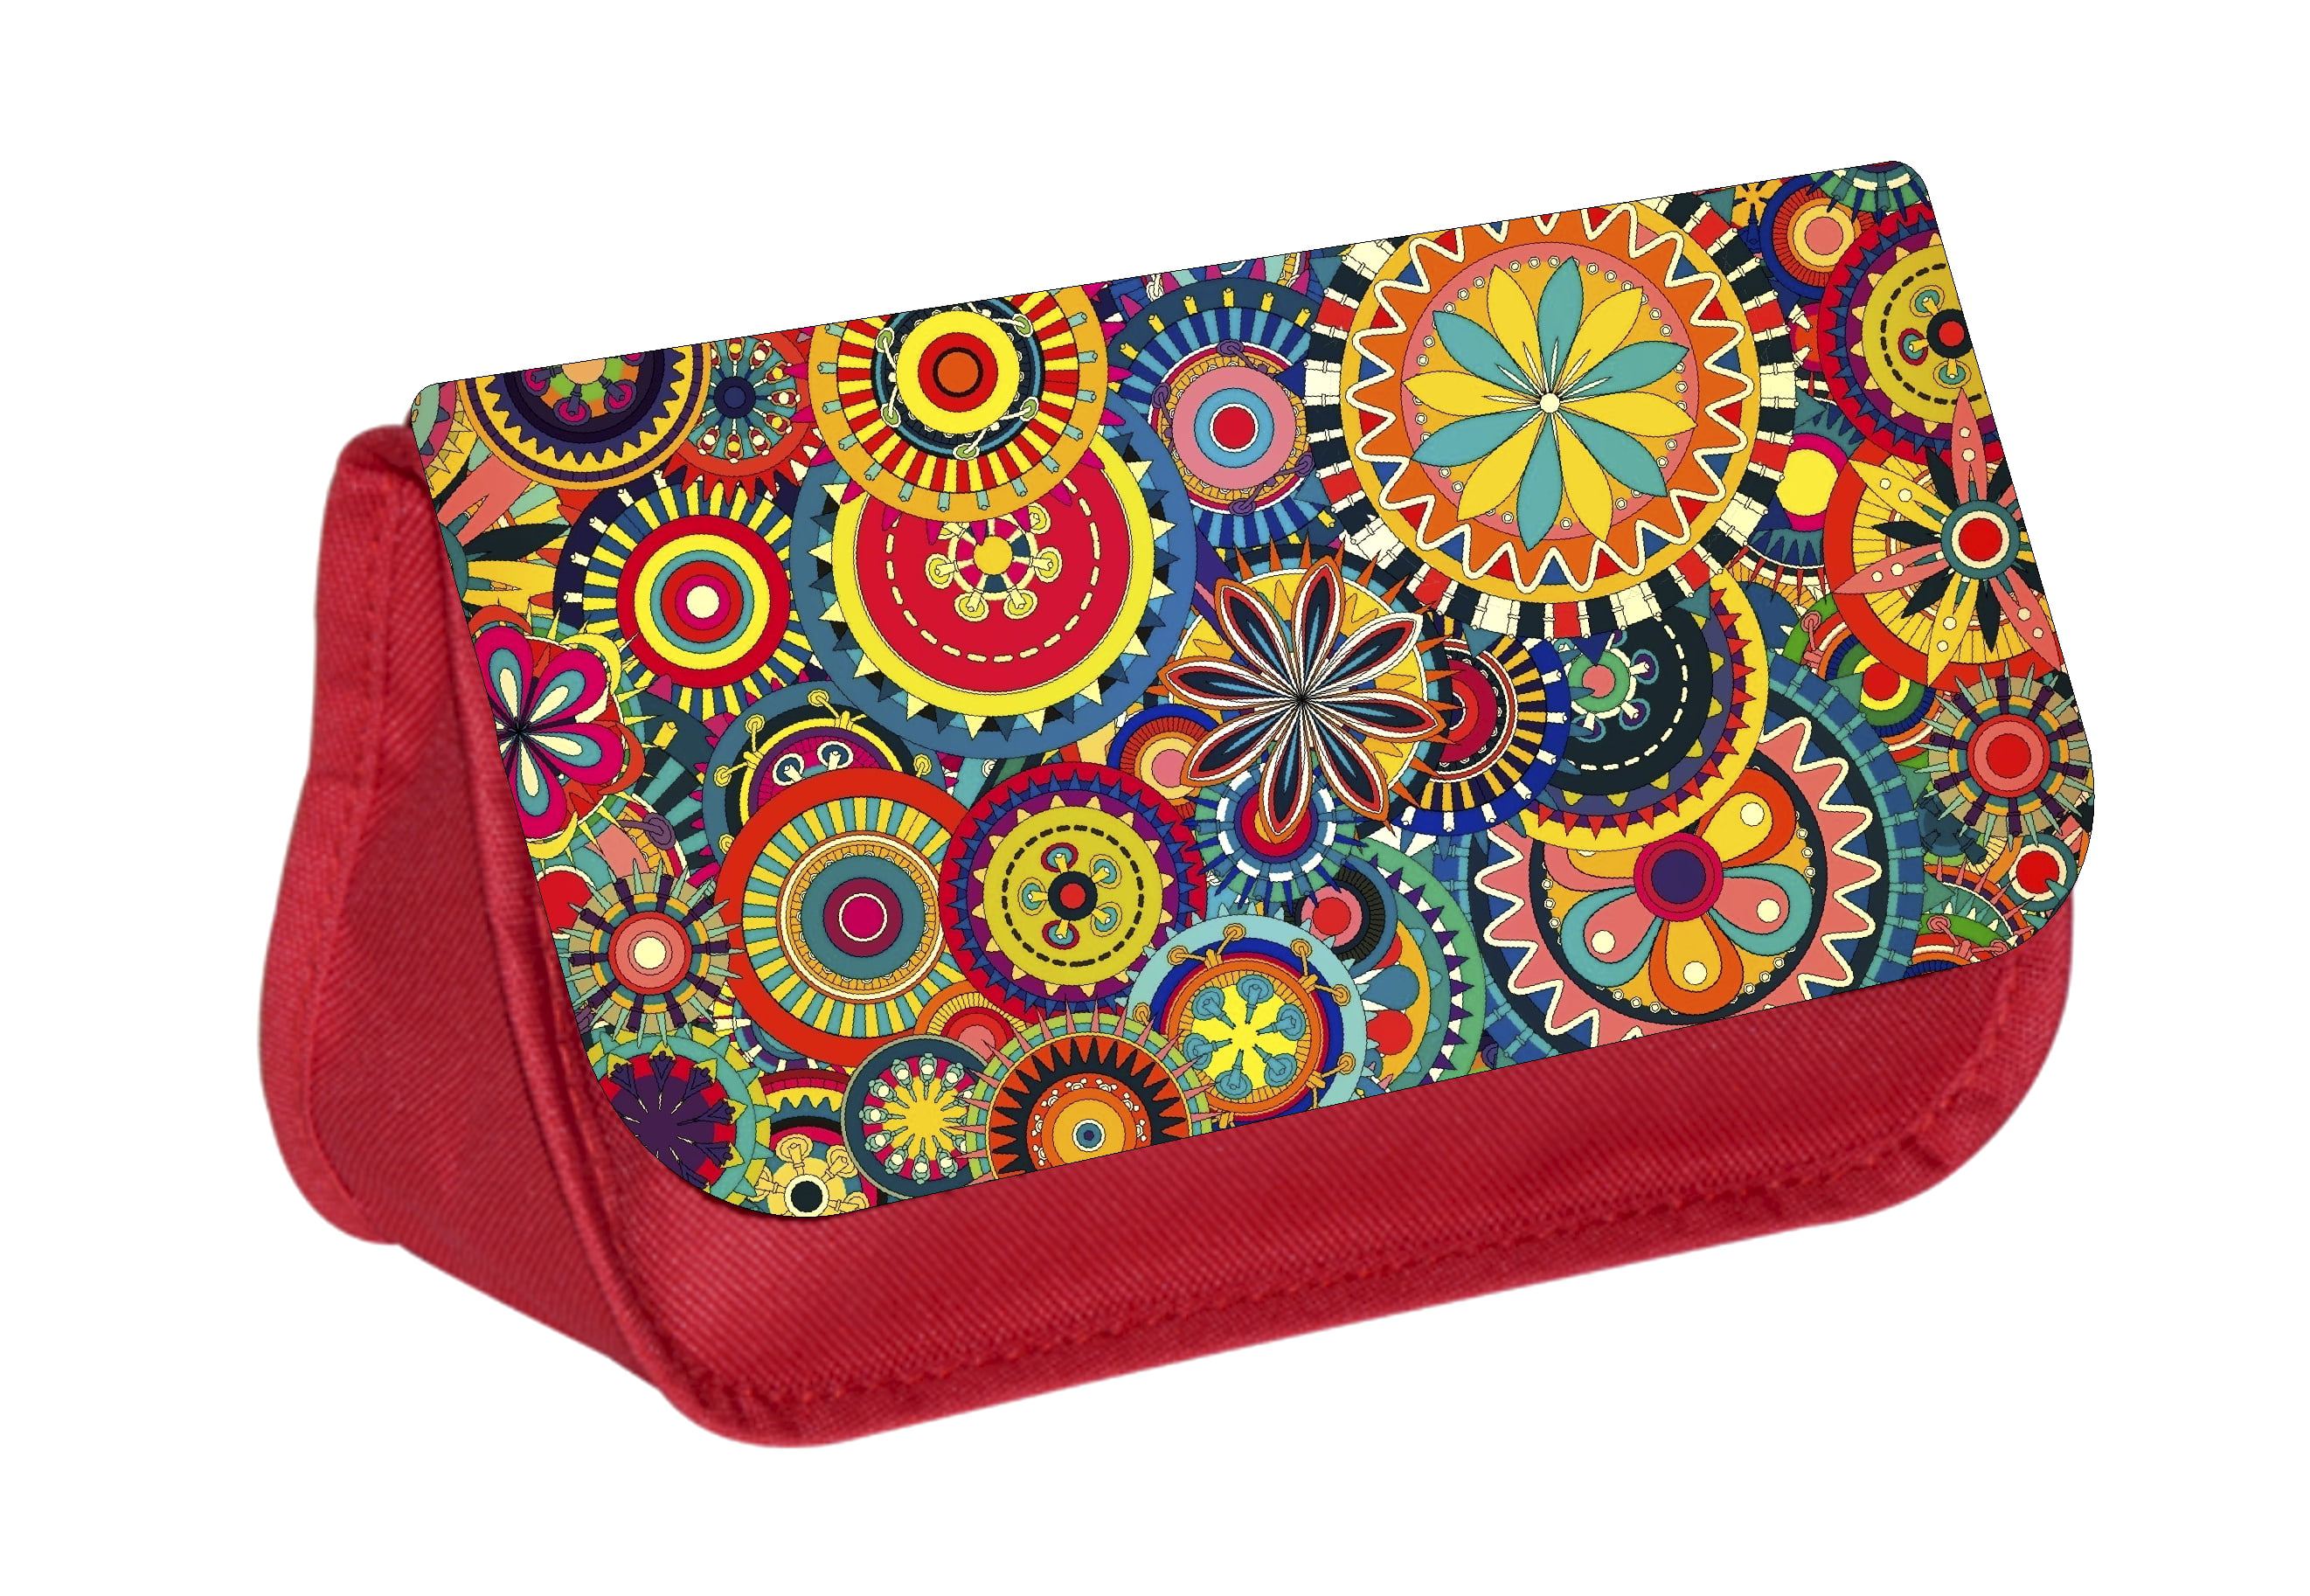 Floral Circles Pattern Print Design - Red Cosmetic Case ...